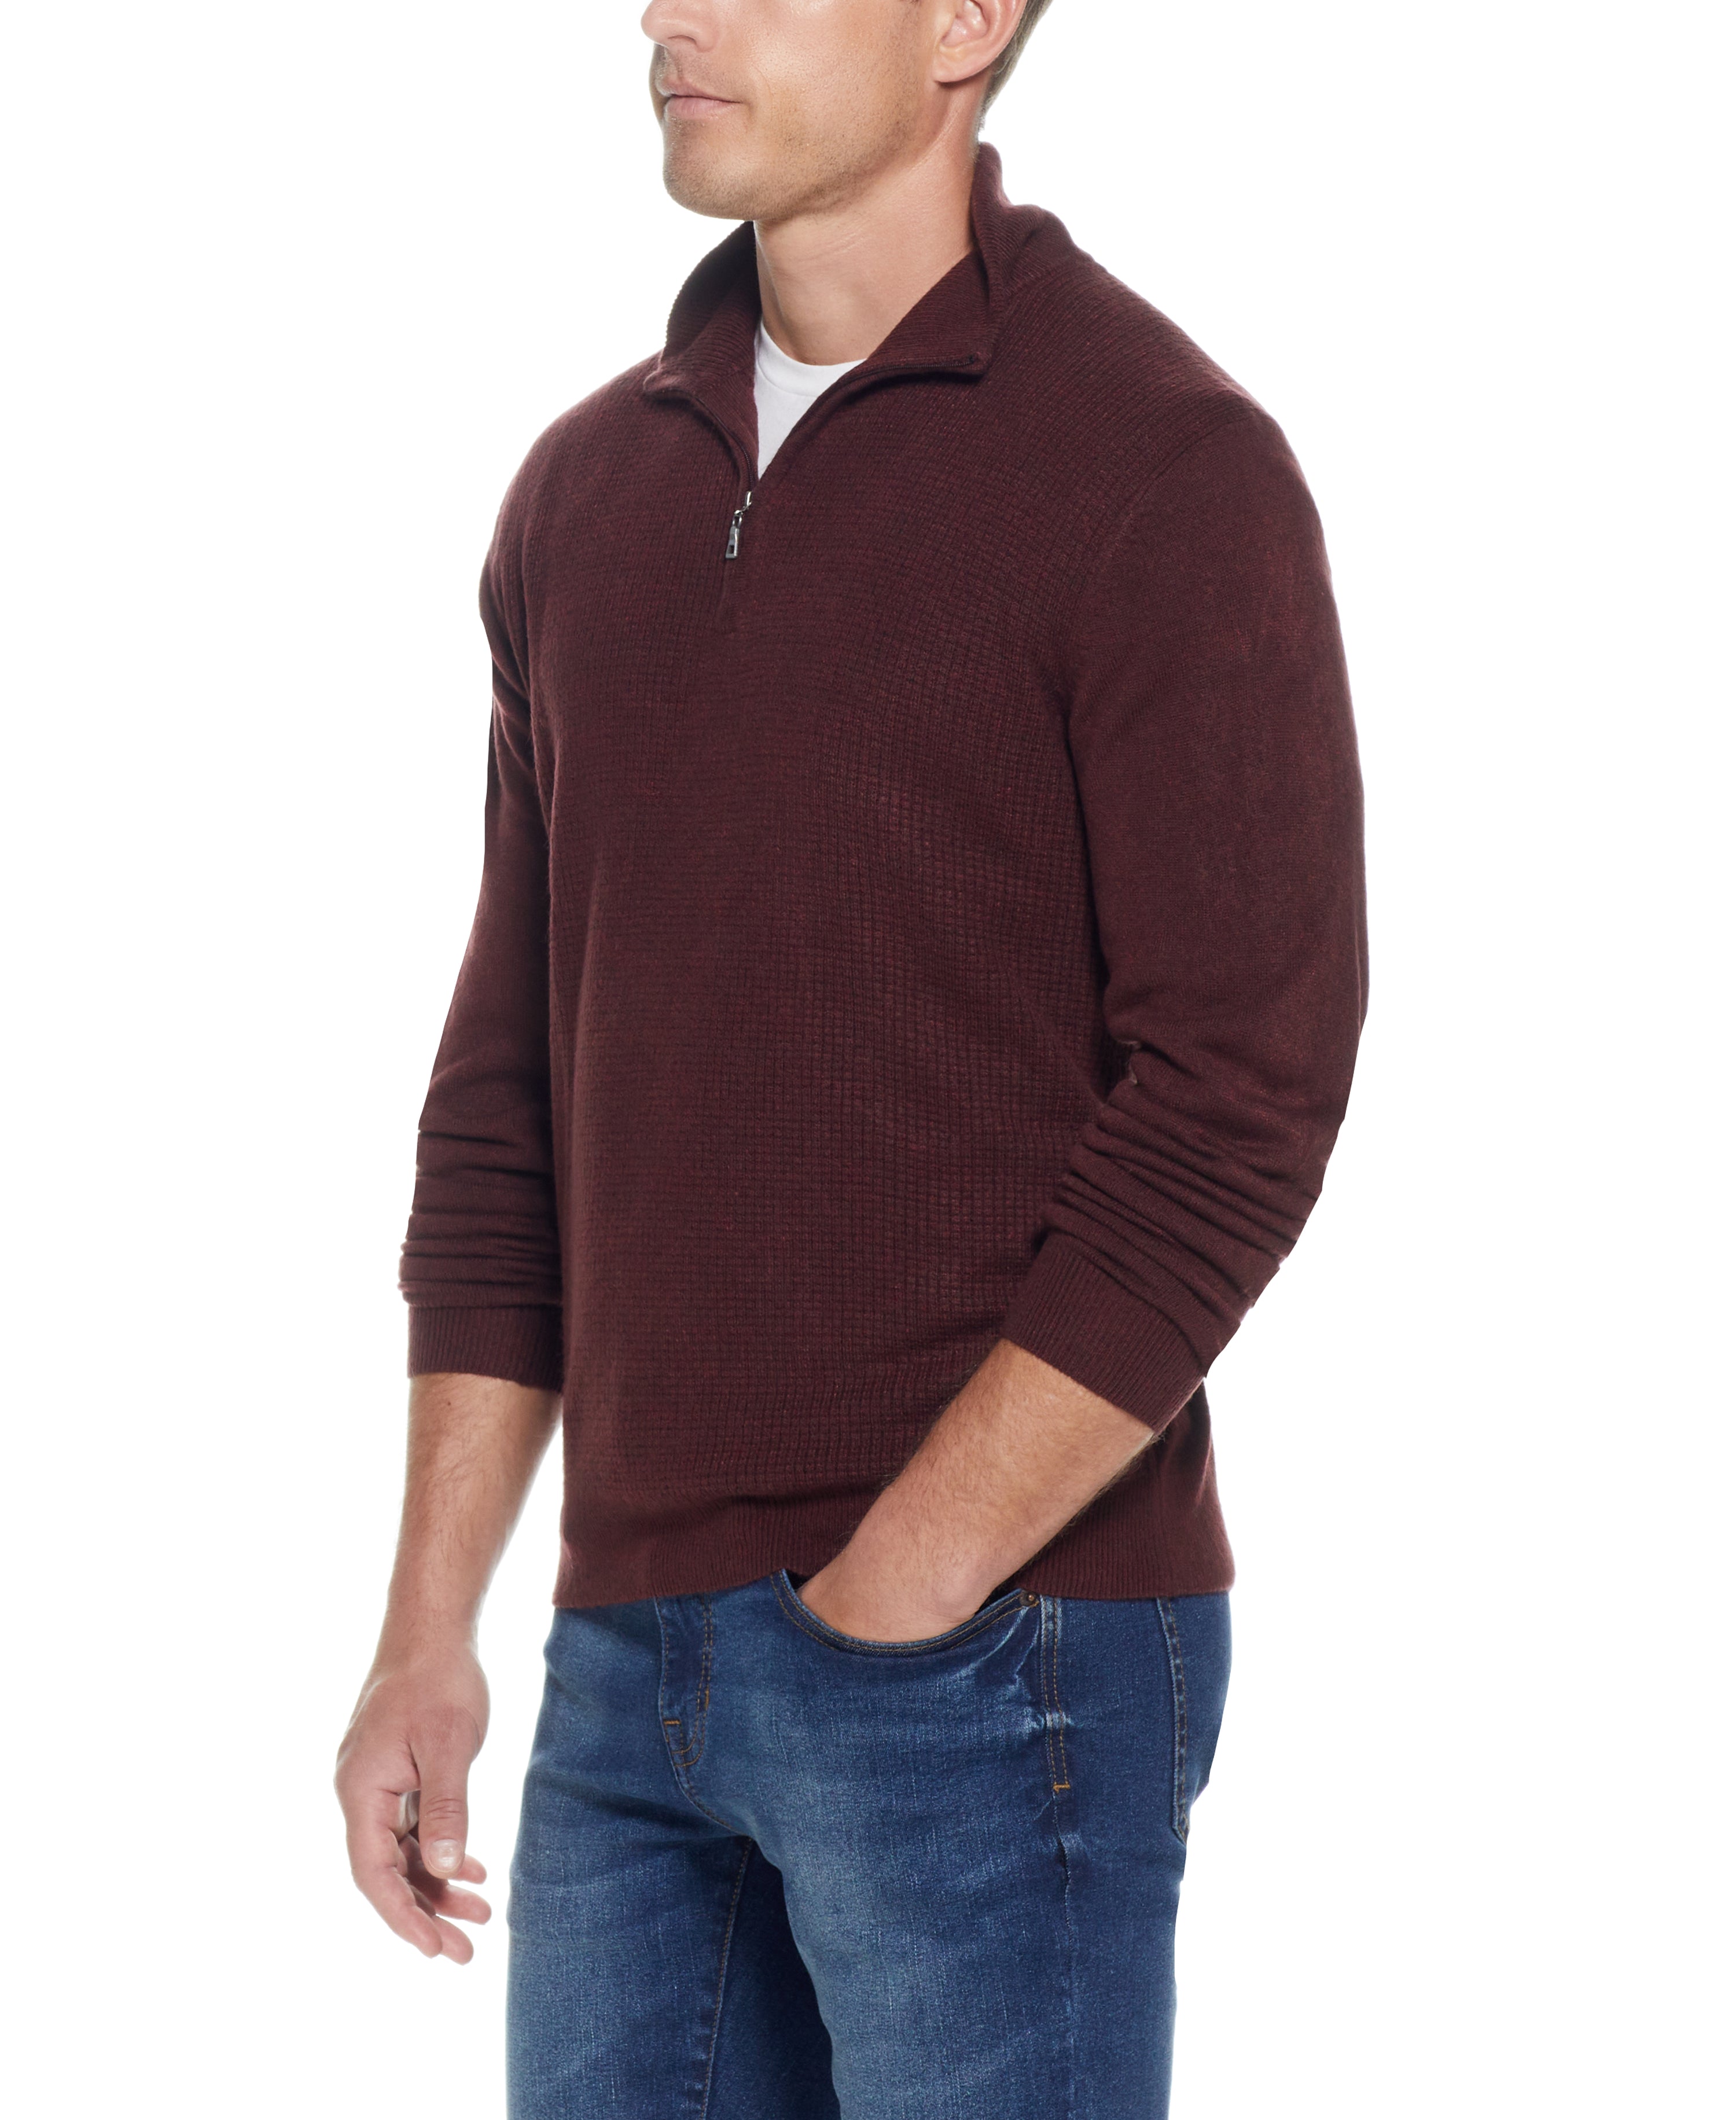 SOFT TOUCH WAFFLE SWEATER 1/4 ZIP in OXBLOOD